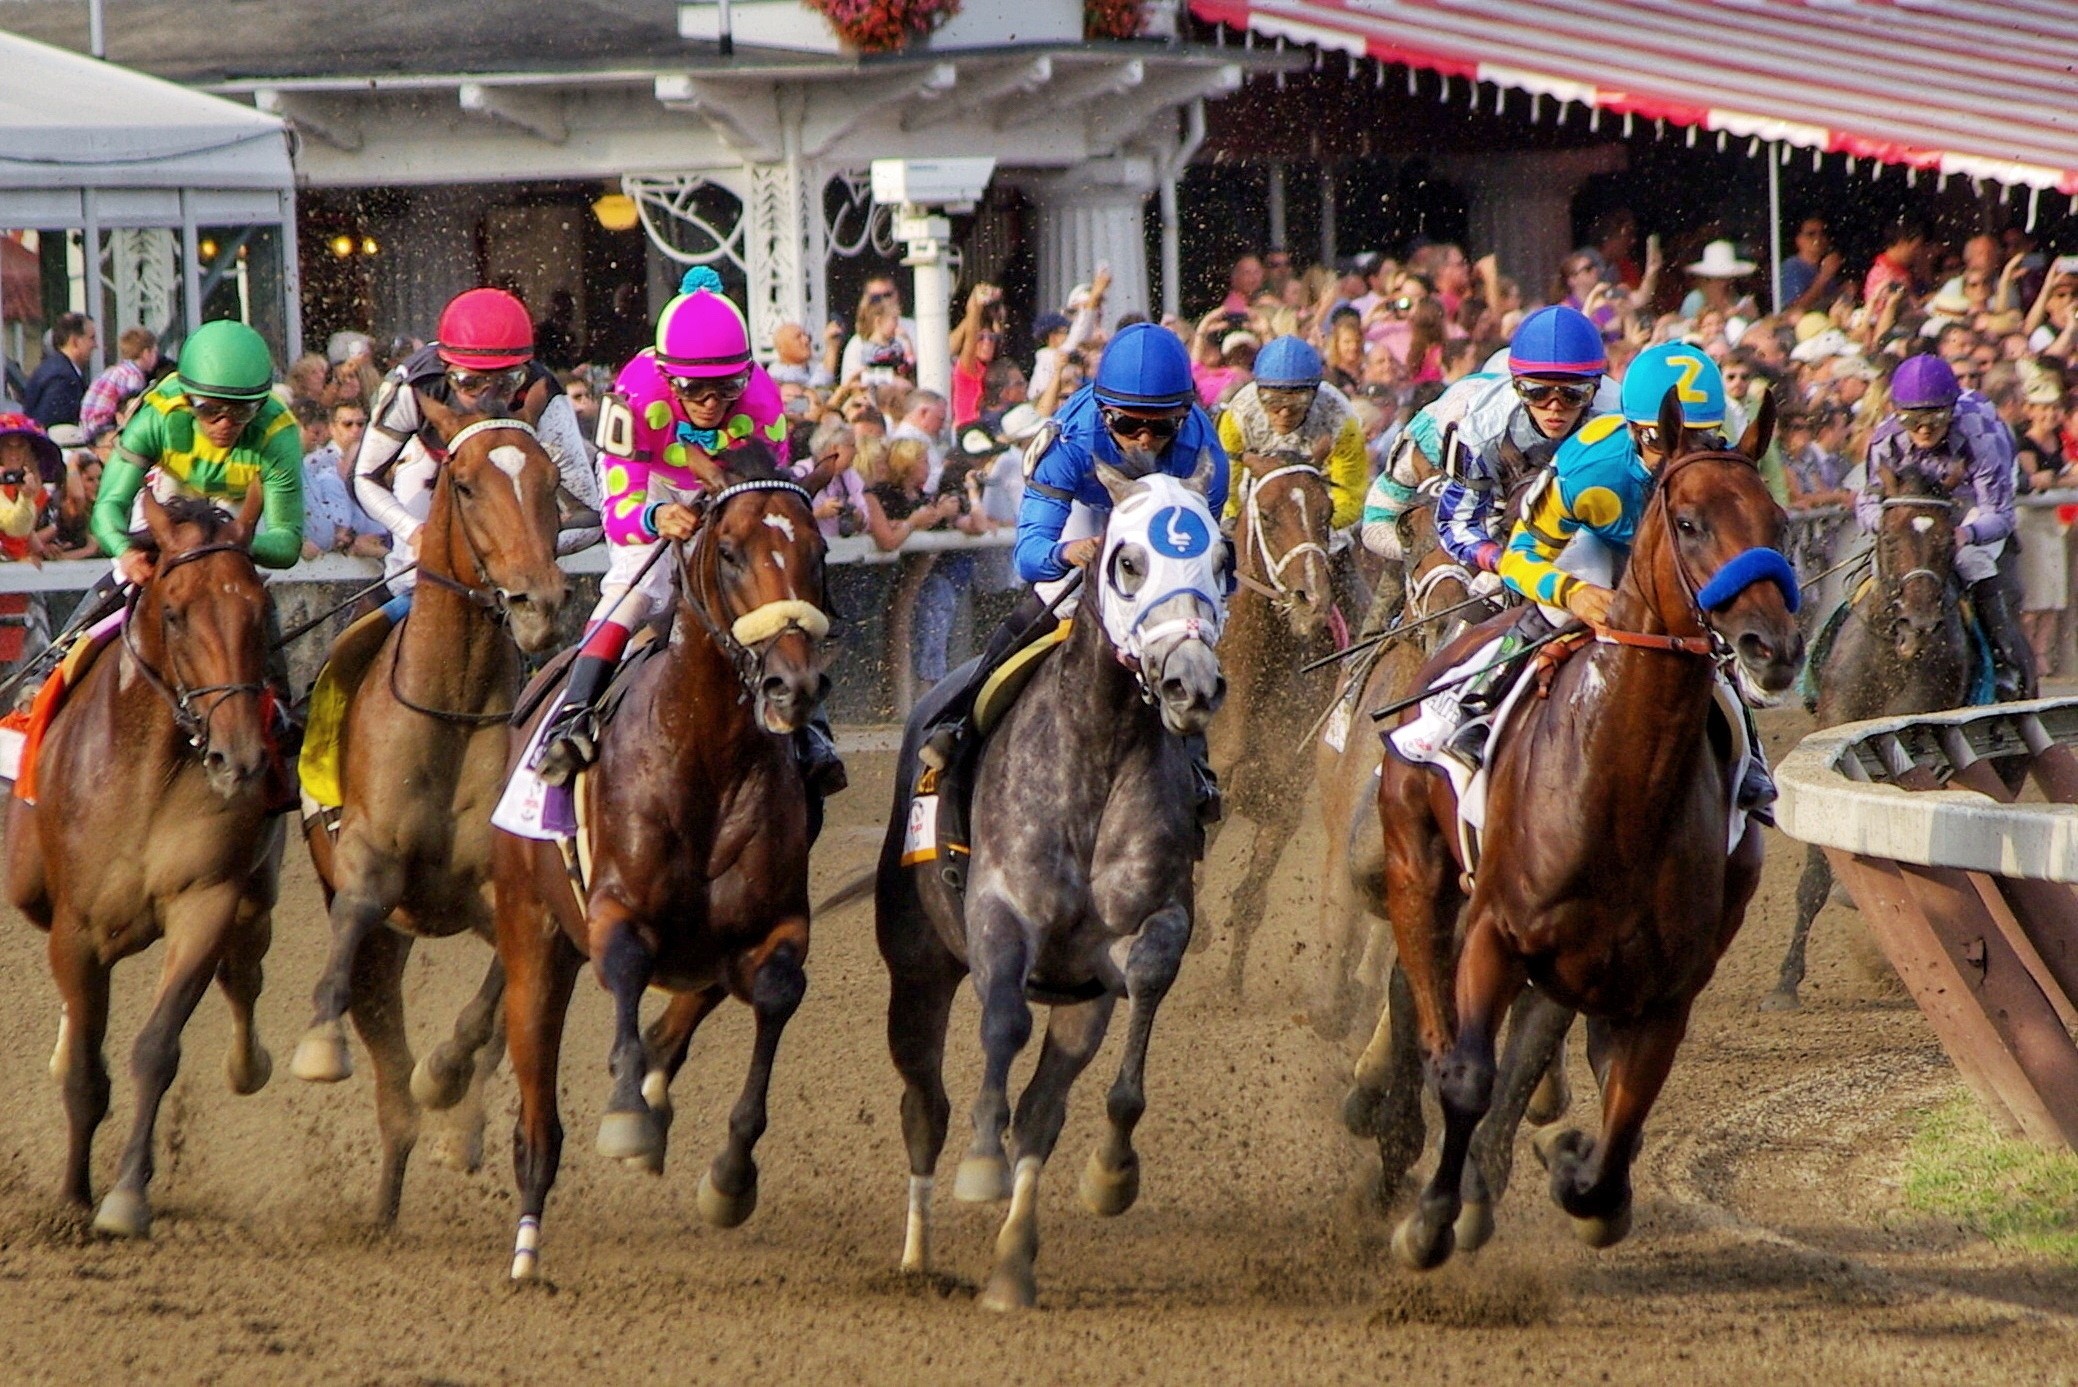 "Champion Travers Palette" (Saratoga Race Course, Saratoga Springs, NY - August 29, 2015), photograph by Frank J. Panucci